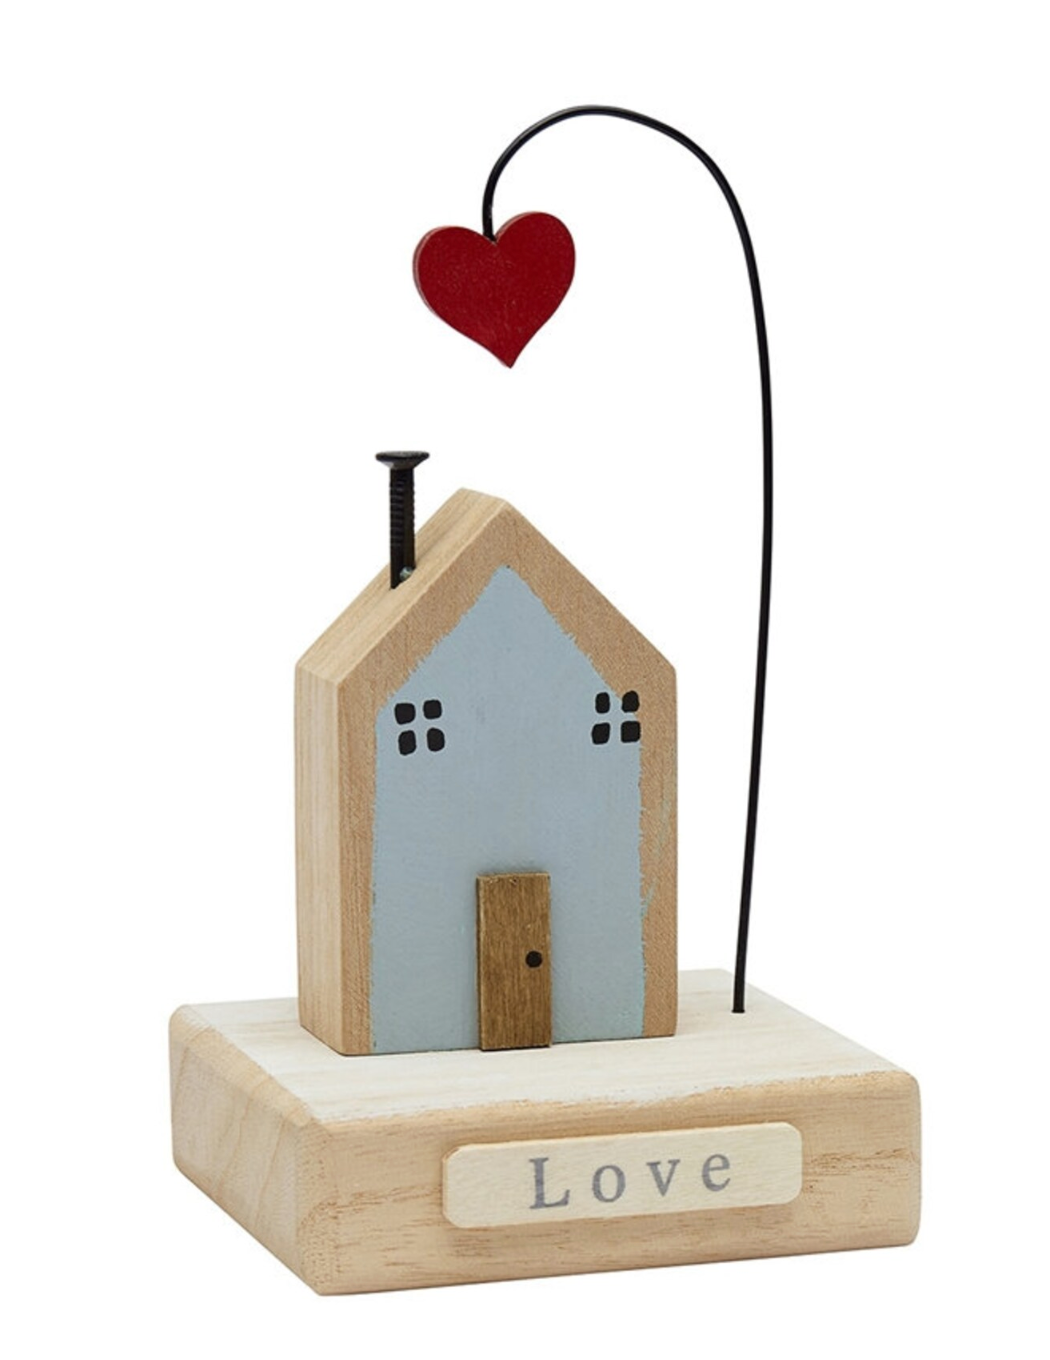 Wooden Heart and Home Decoration